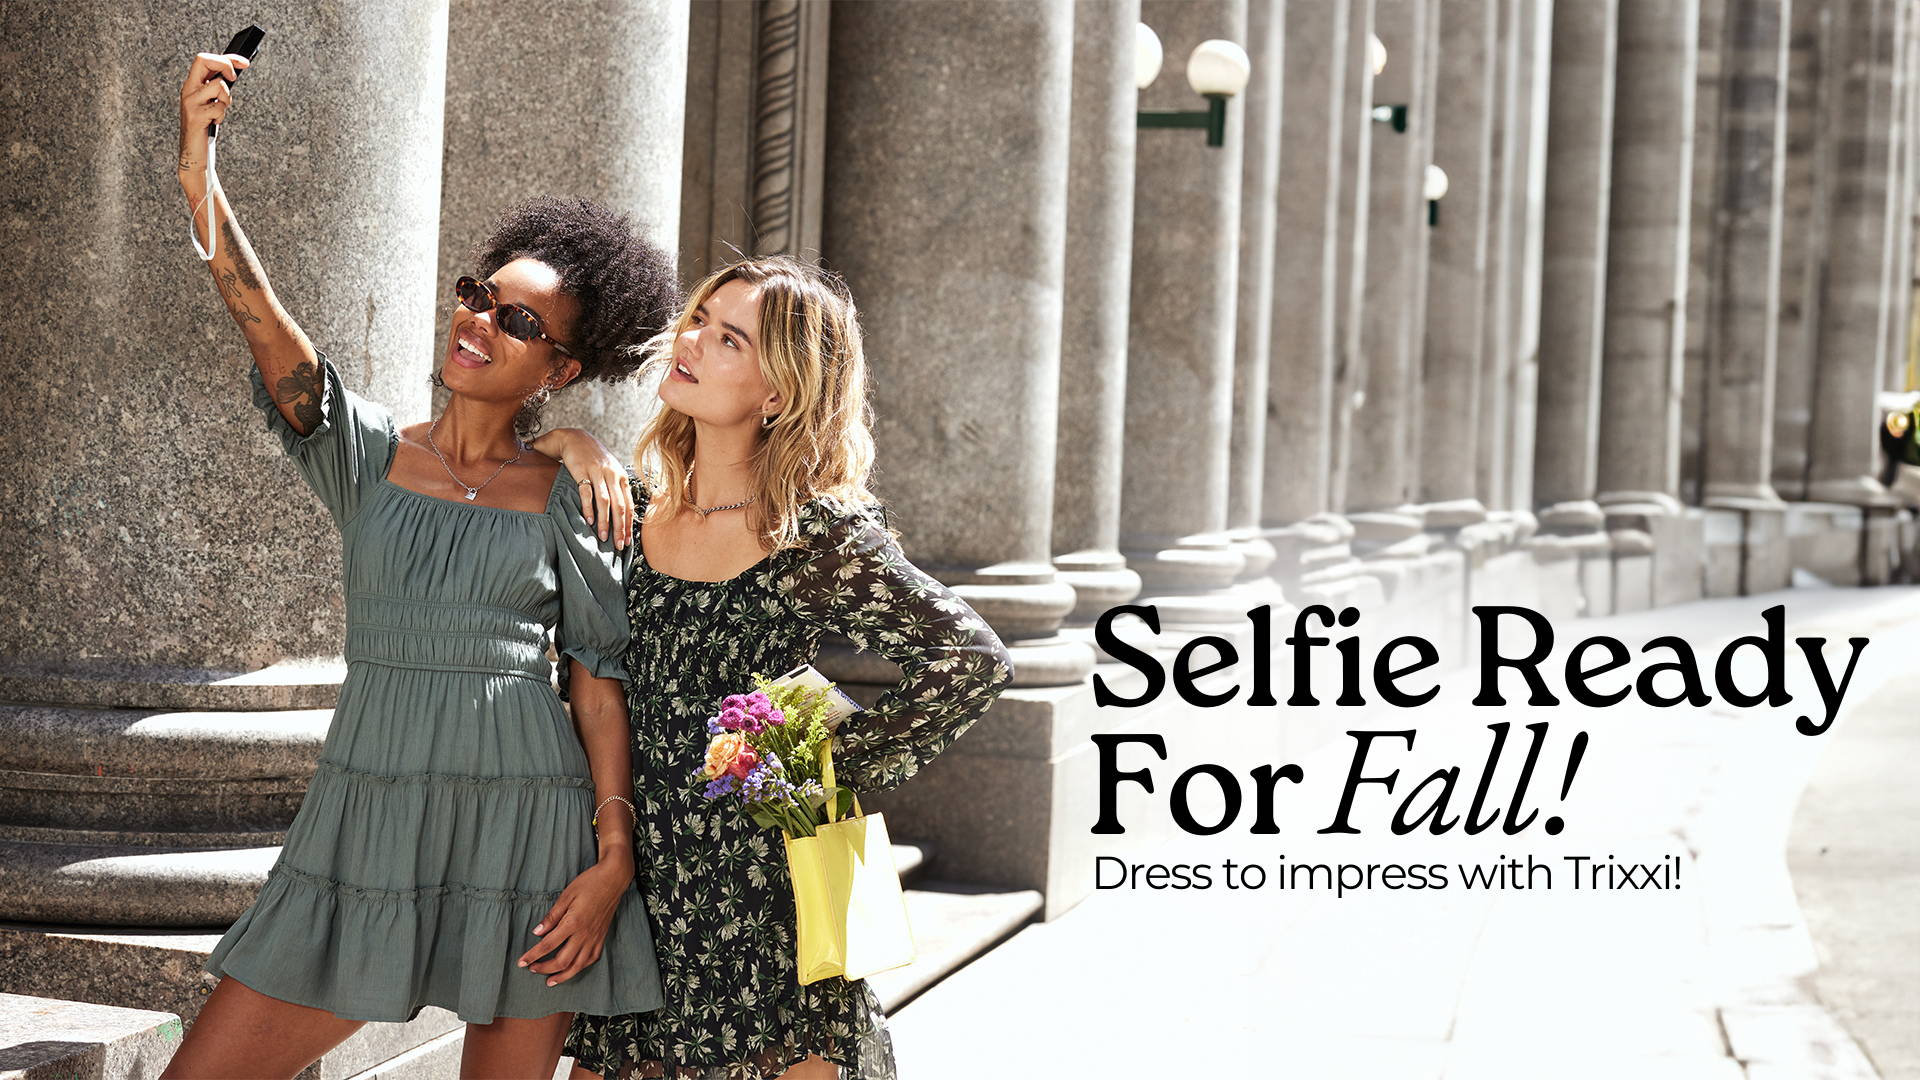 Selfie ready for fall, dress to impress in Trixxi, two girls in the city taking selfie images in a long sleeve black floral dress and sage green tier short sleeve mini dress.